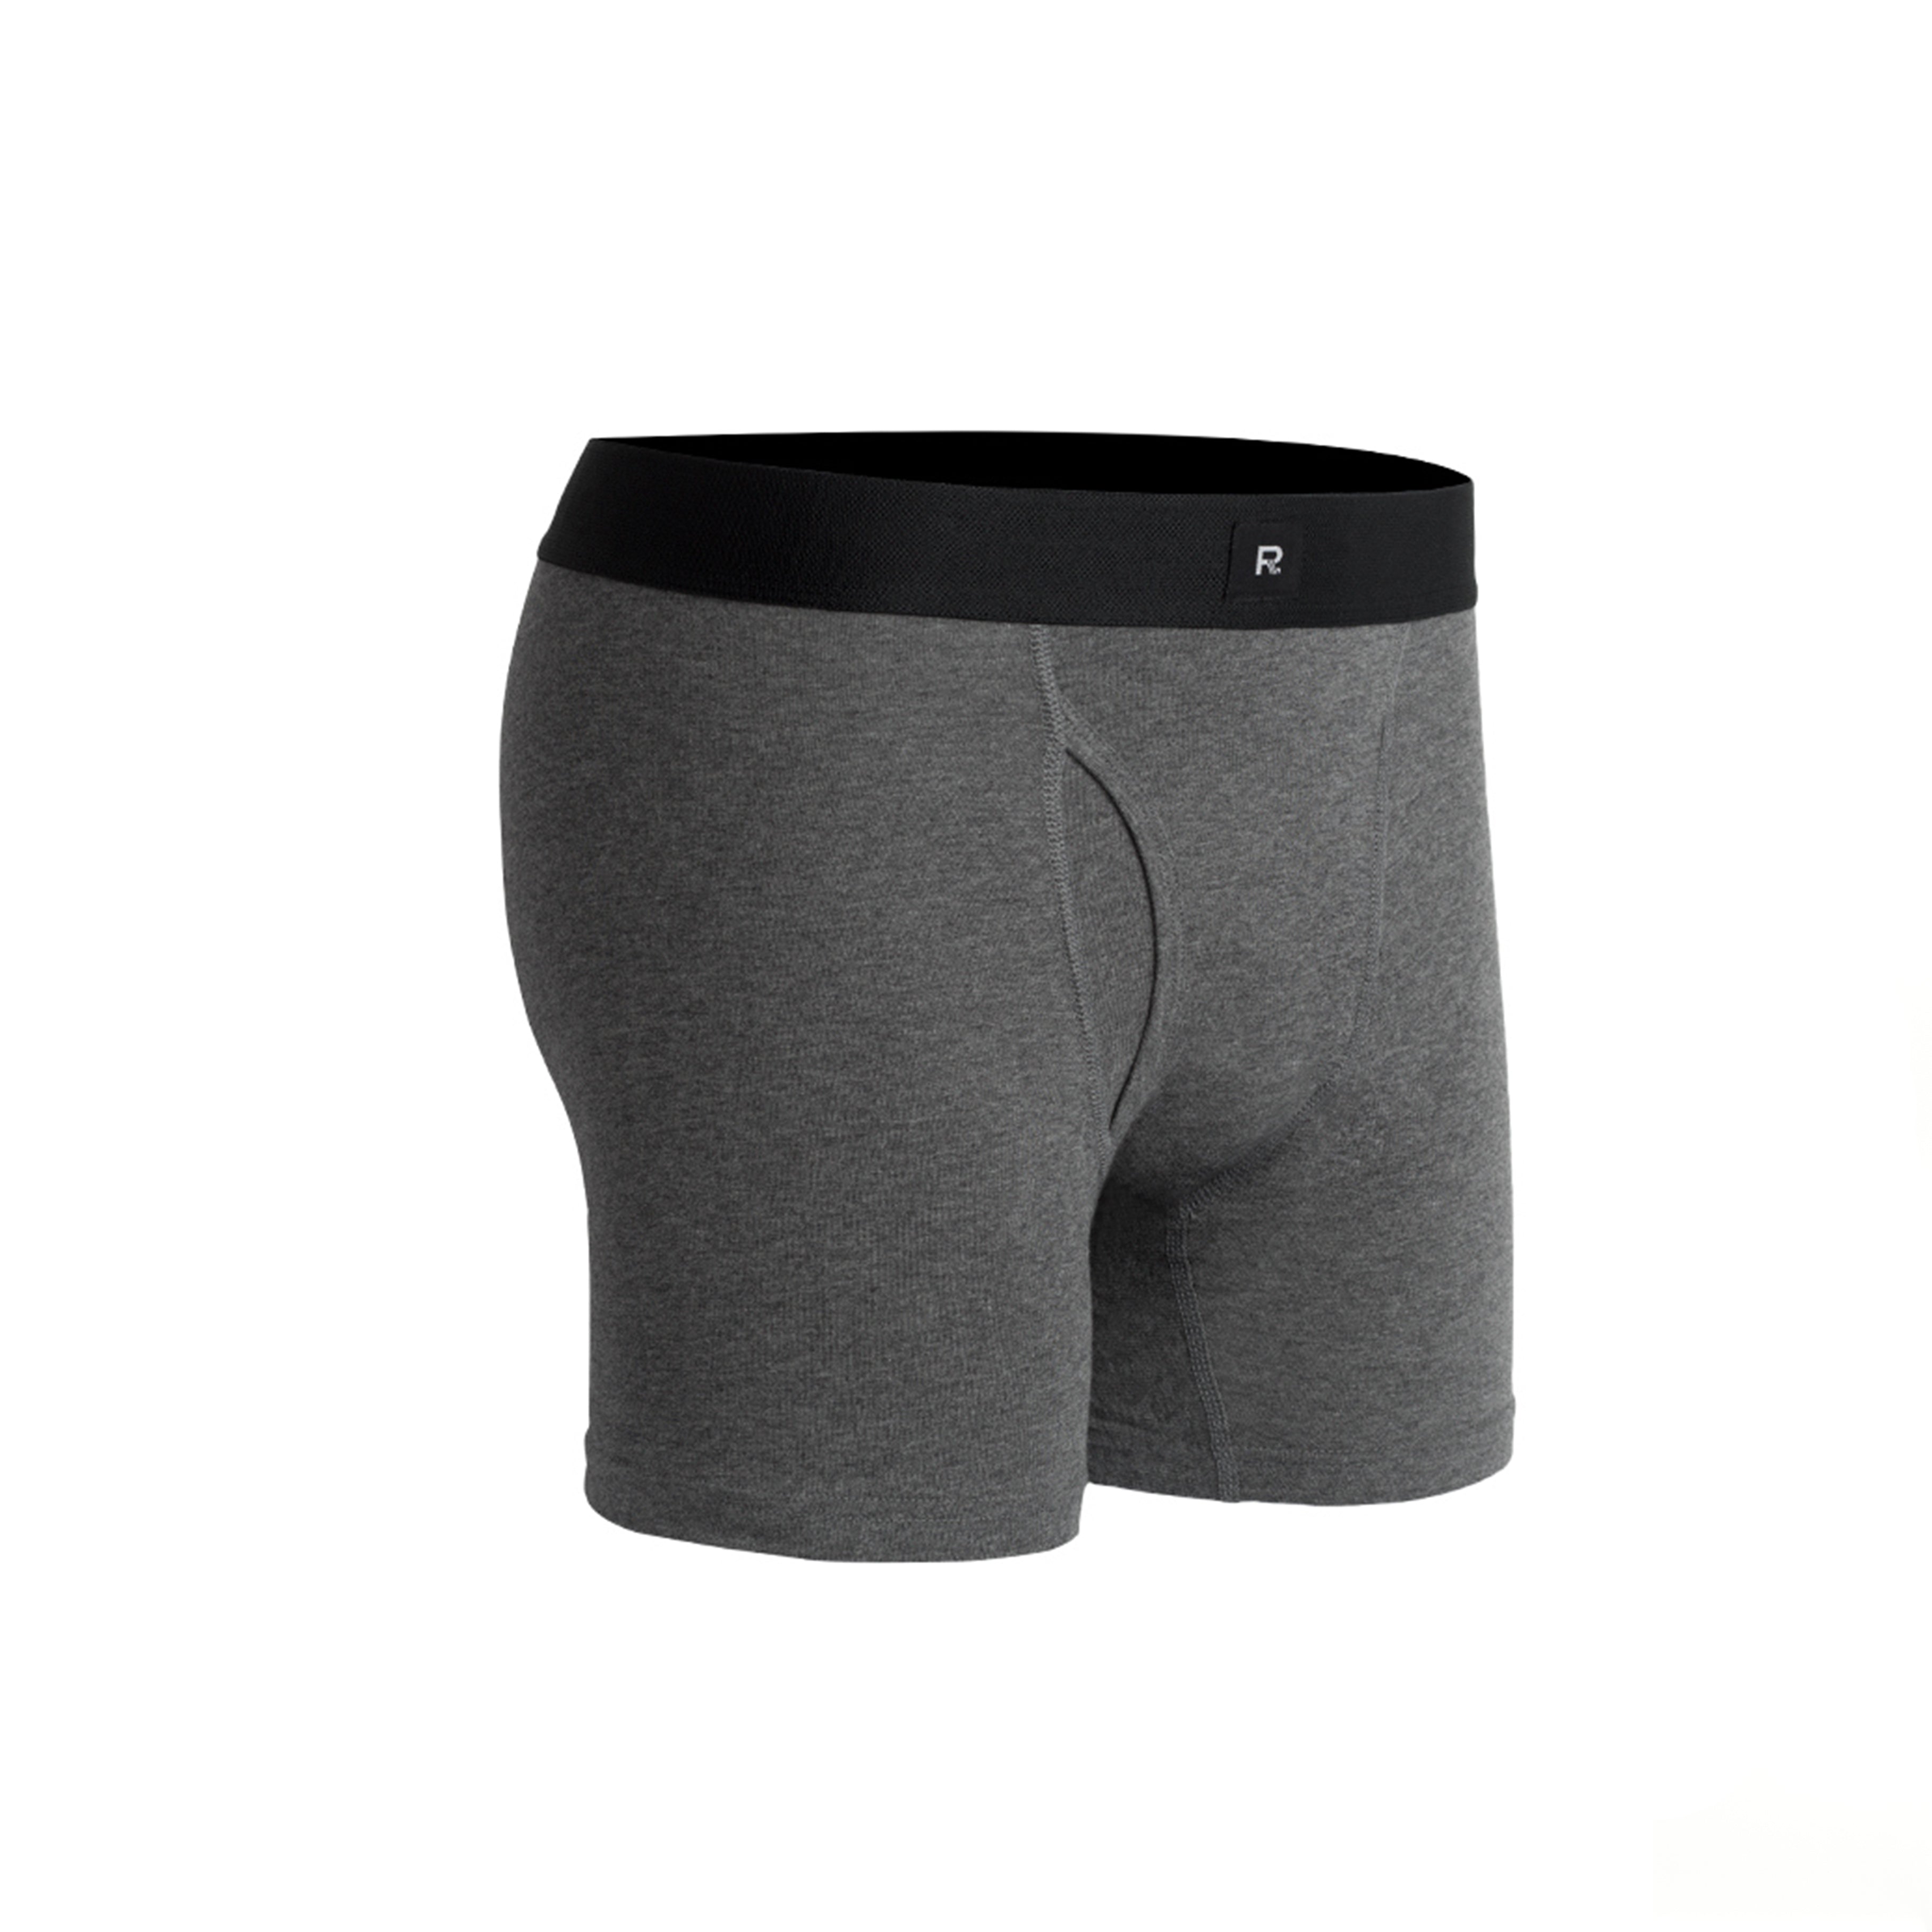 Richer Poorer - Smith Boxer Brief - Charcoal